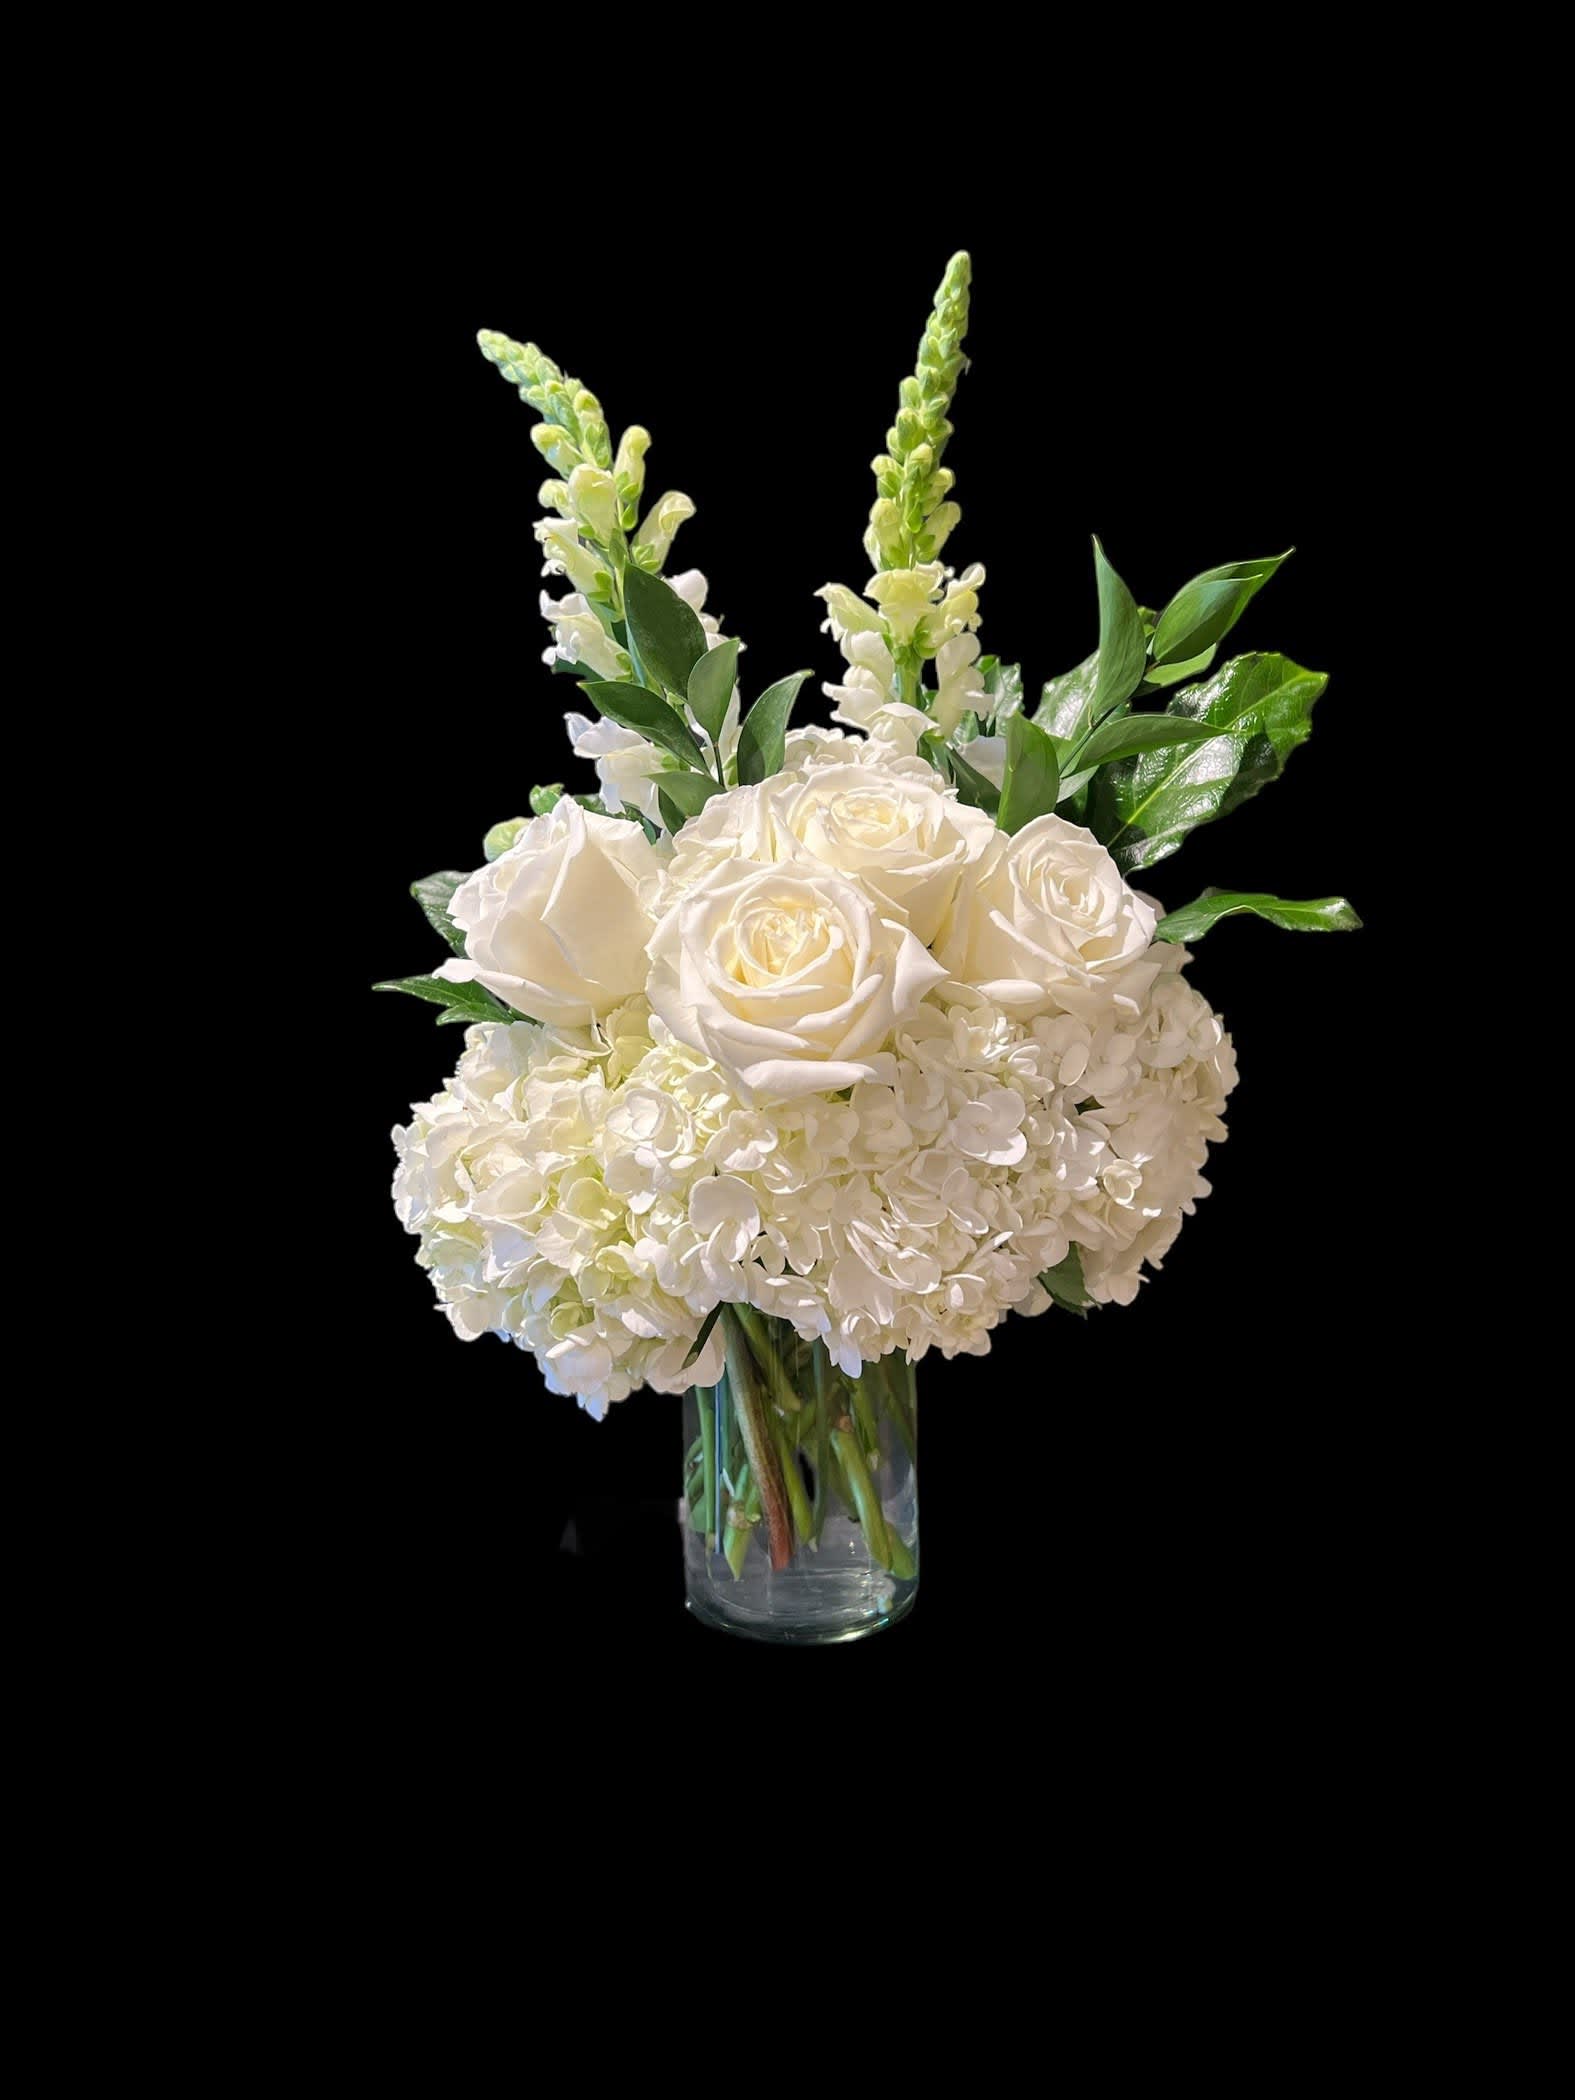 Eternal Friendship - The Eternal Friendship bouquet is a welcome expression of support for friends, family or coworkers during times when they need it most.